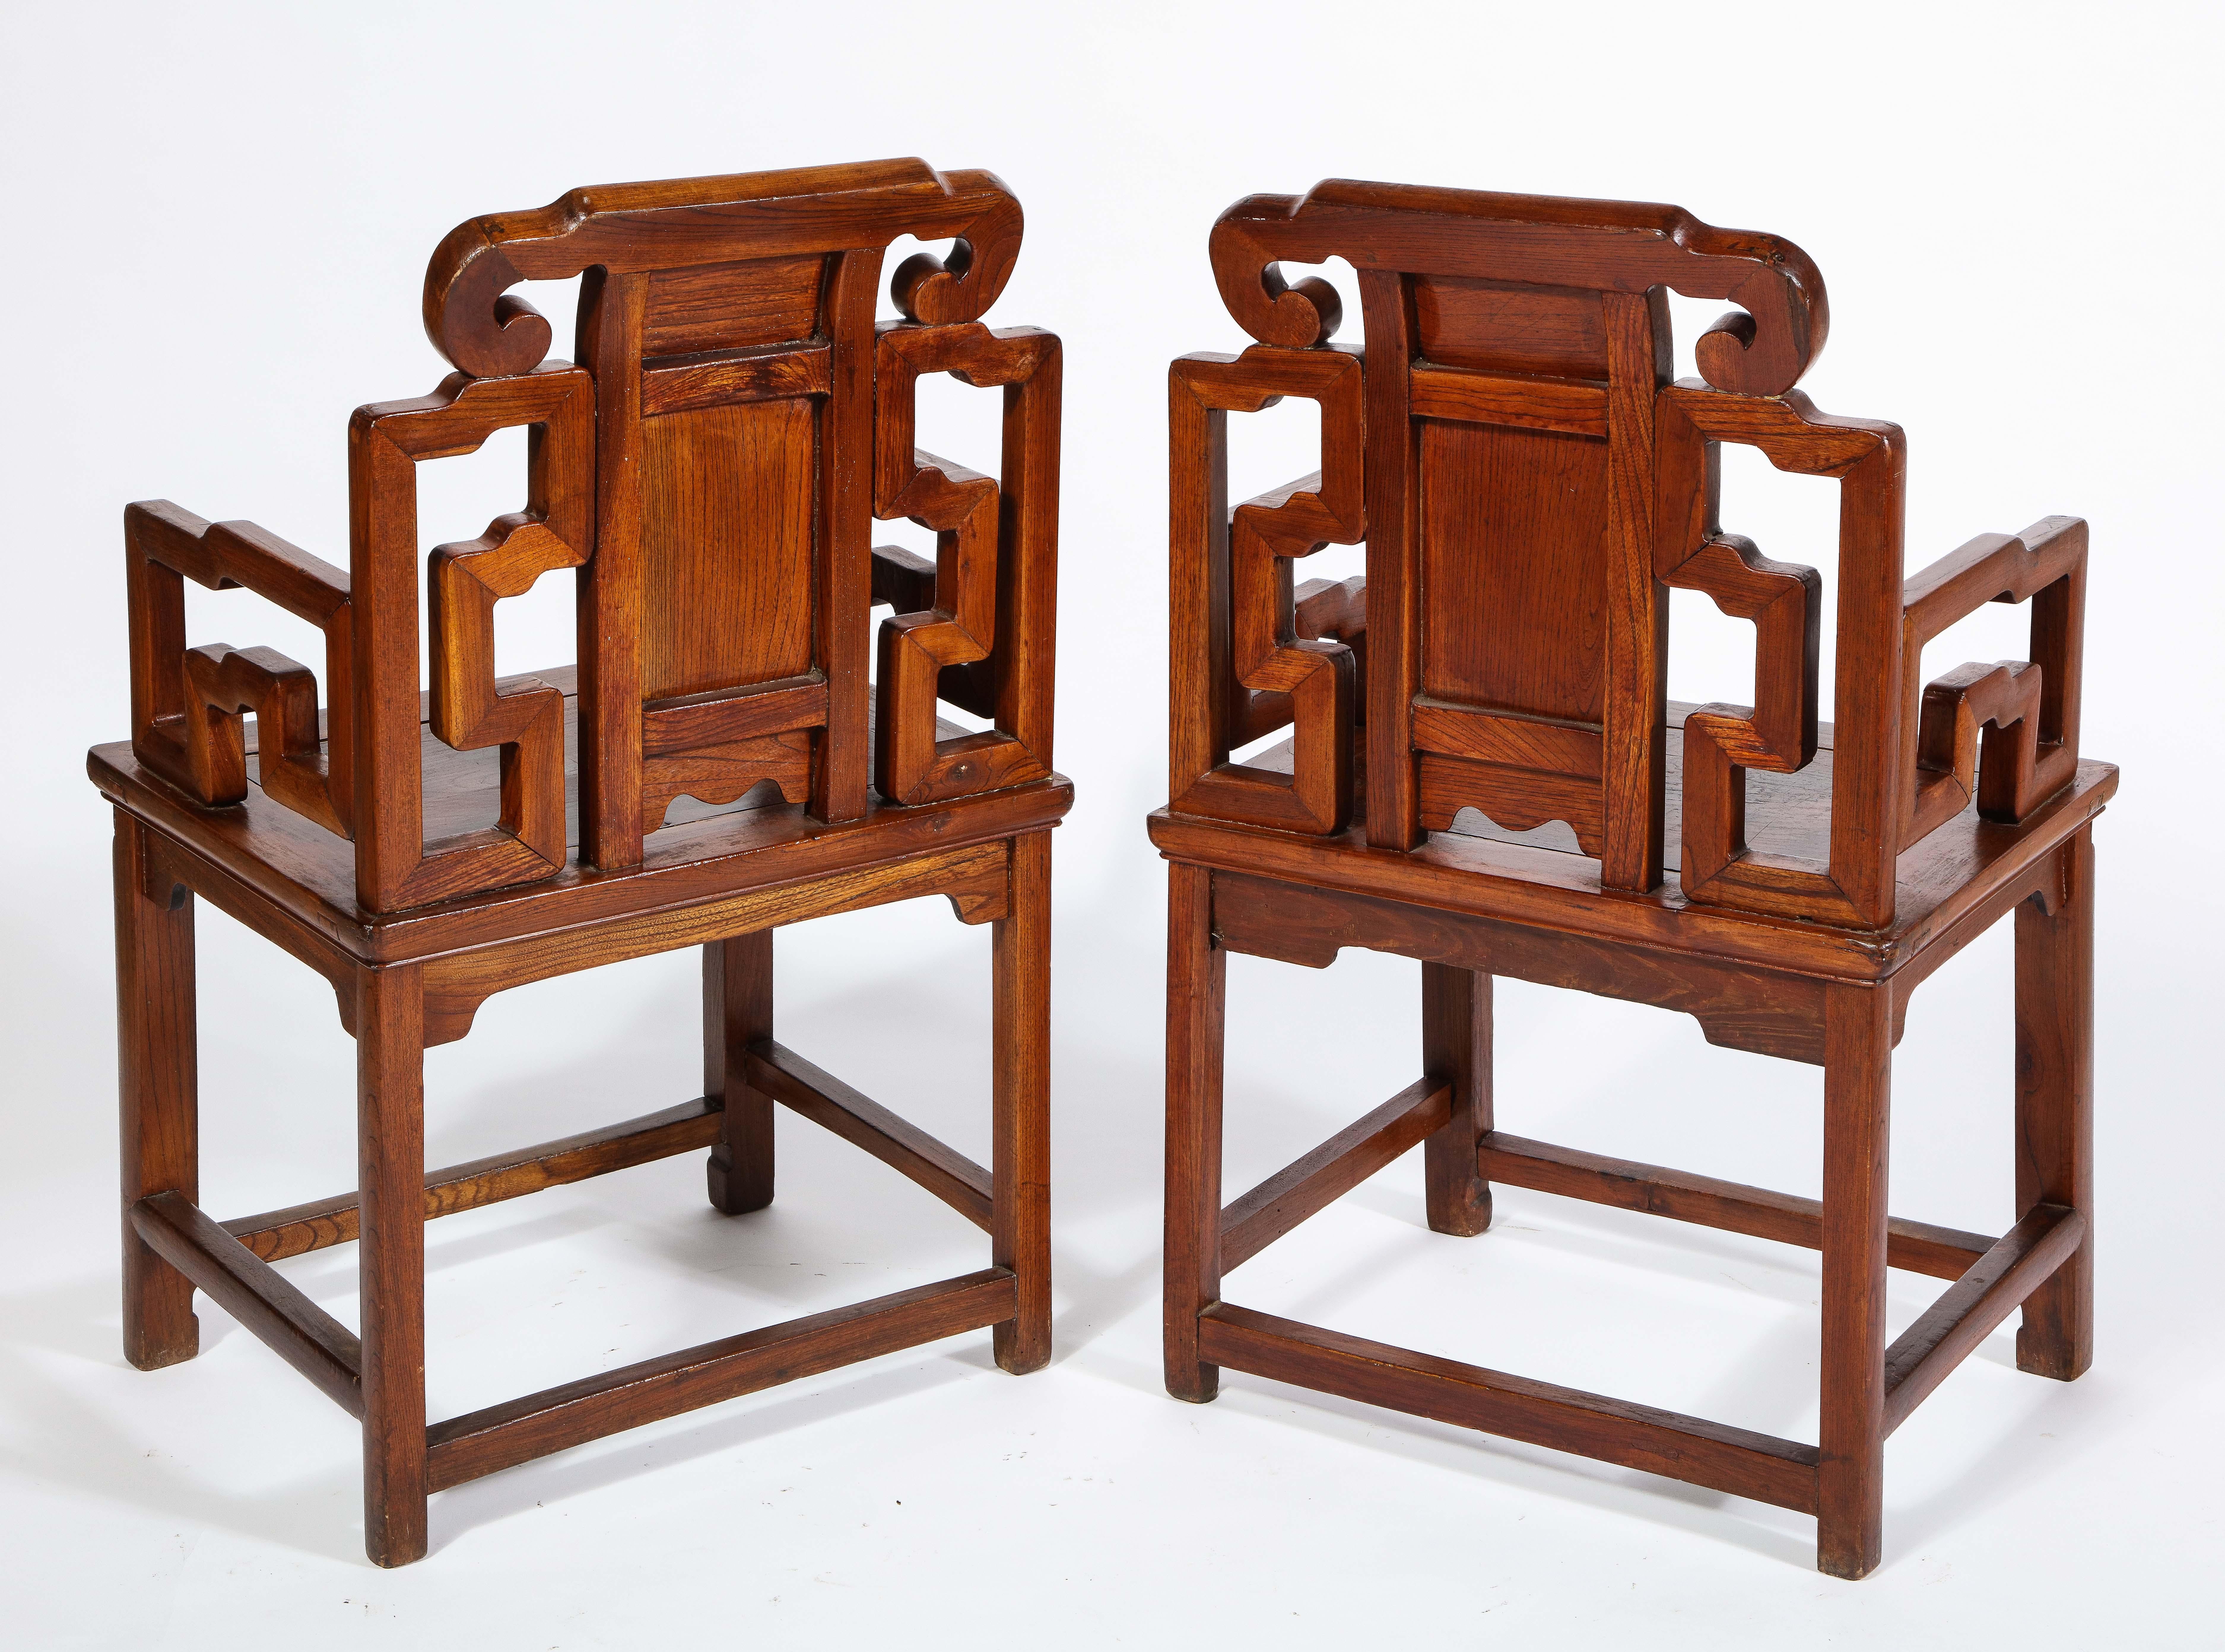 Hand-Carved Pair of Chinese Hardwood Chairs with Fretwork Designs and High Relief Panels For Sale